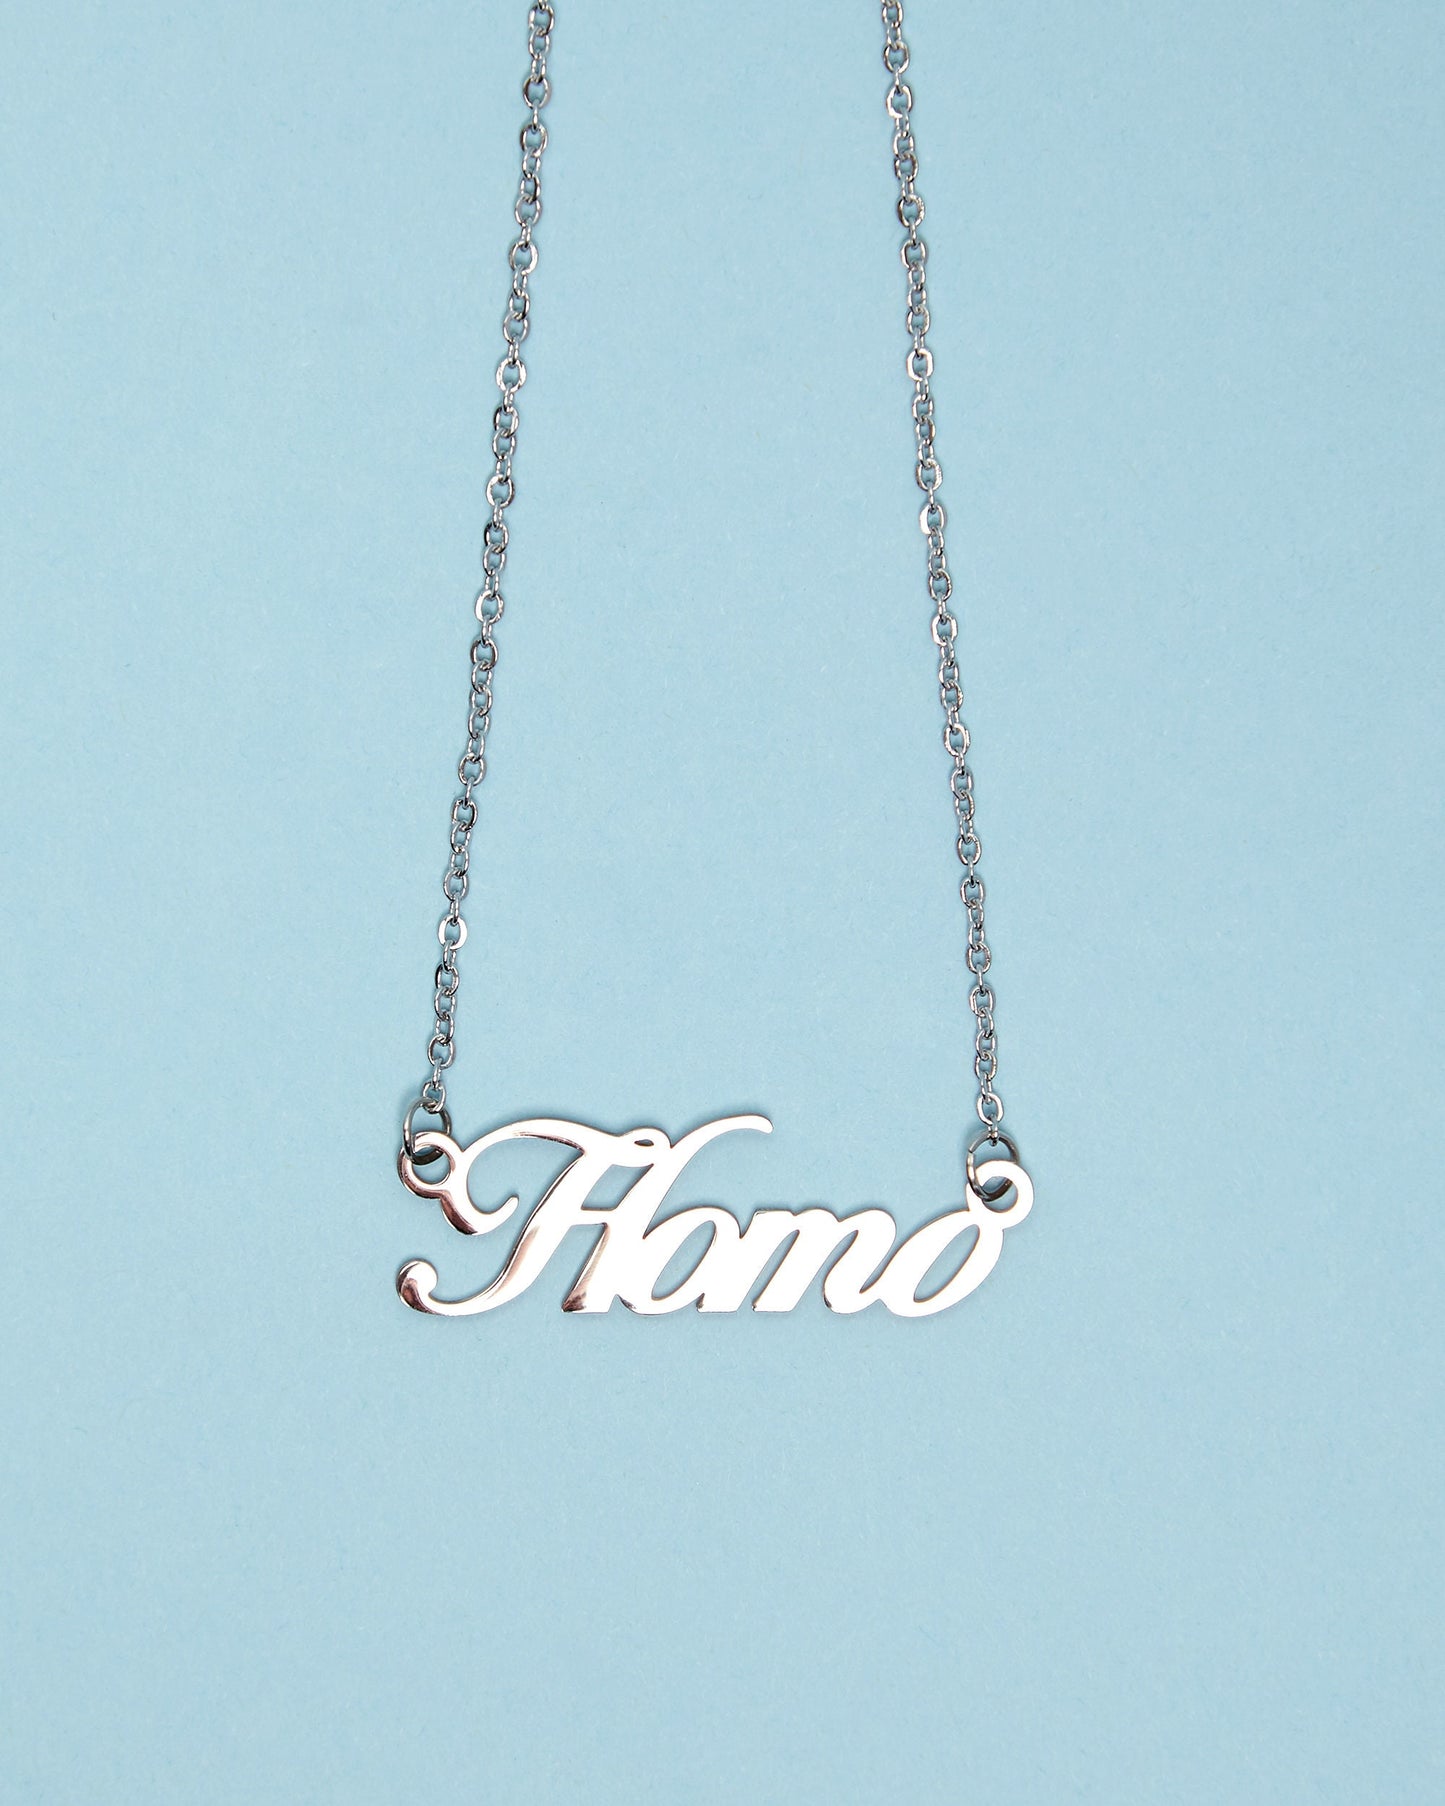 HOMO chain - stainless steel